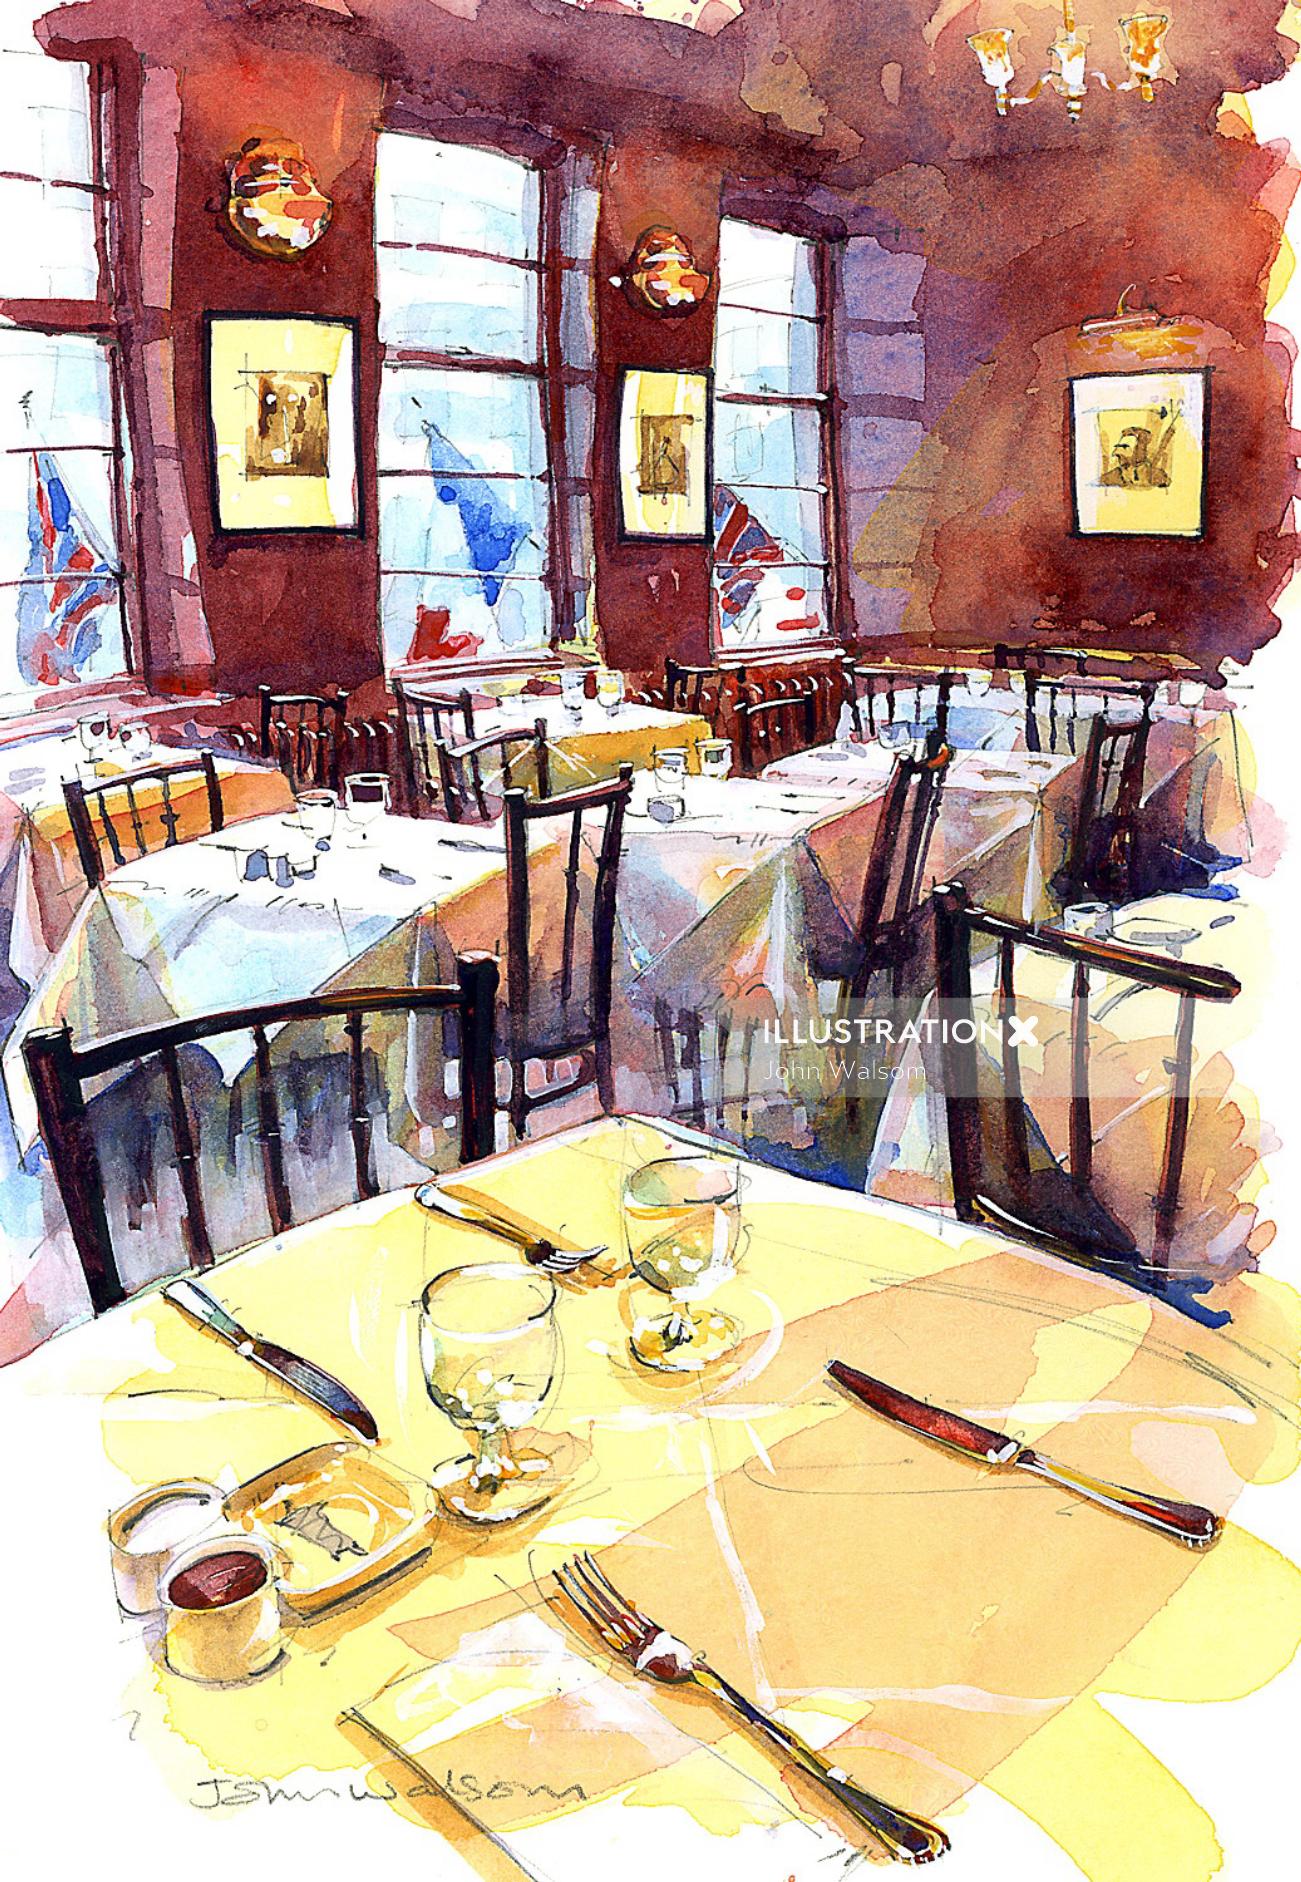 The drawing by John Walsom of the French House Restaurant